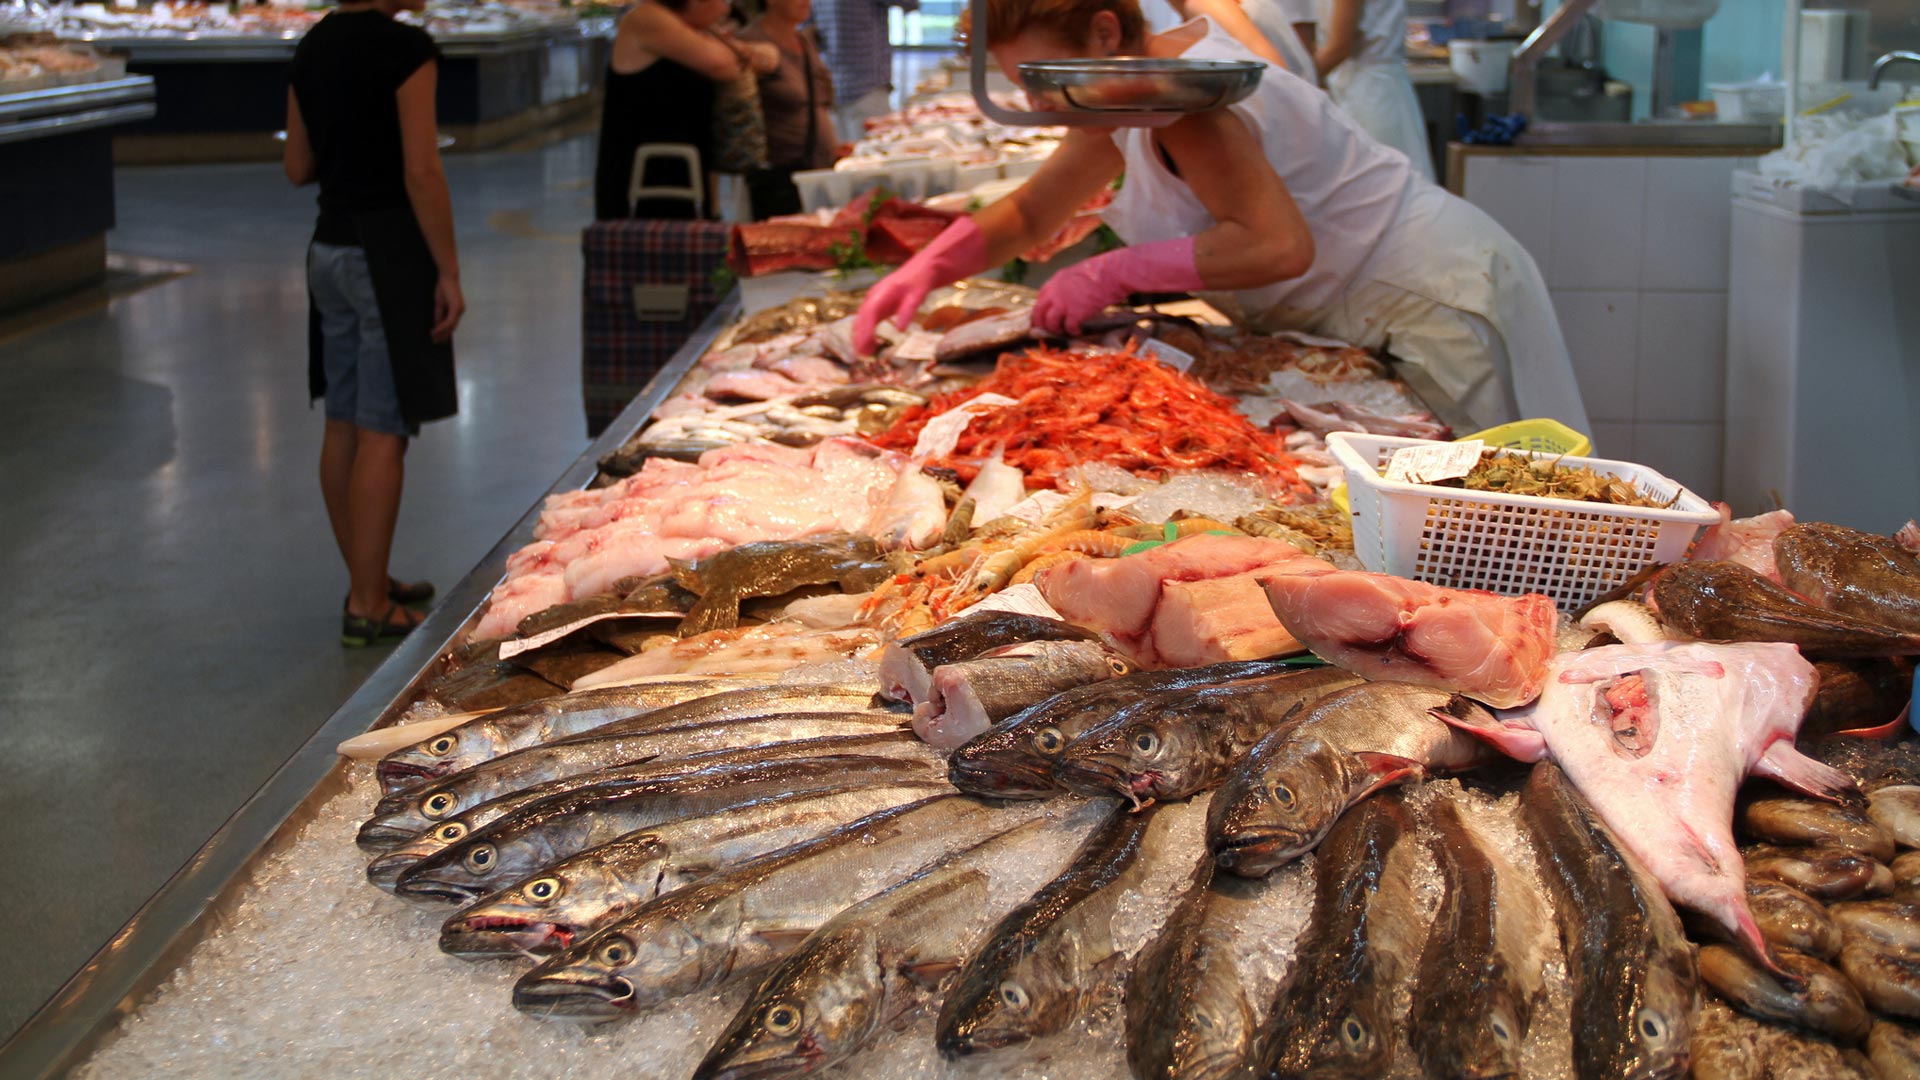 The Spanish Mediterranean fishing sector and its market reaction to the ongoing coronavirus crisis